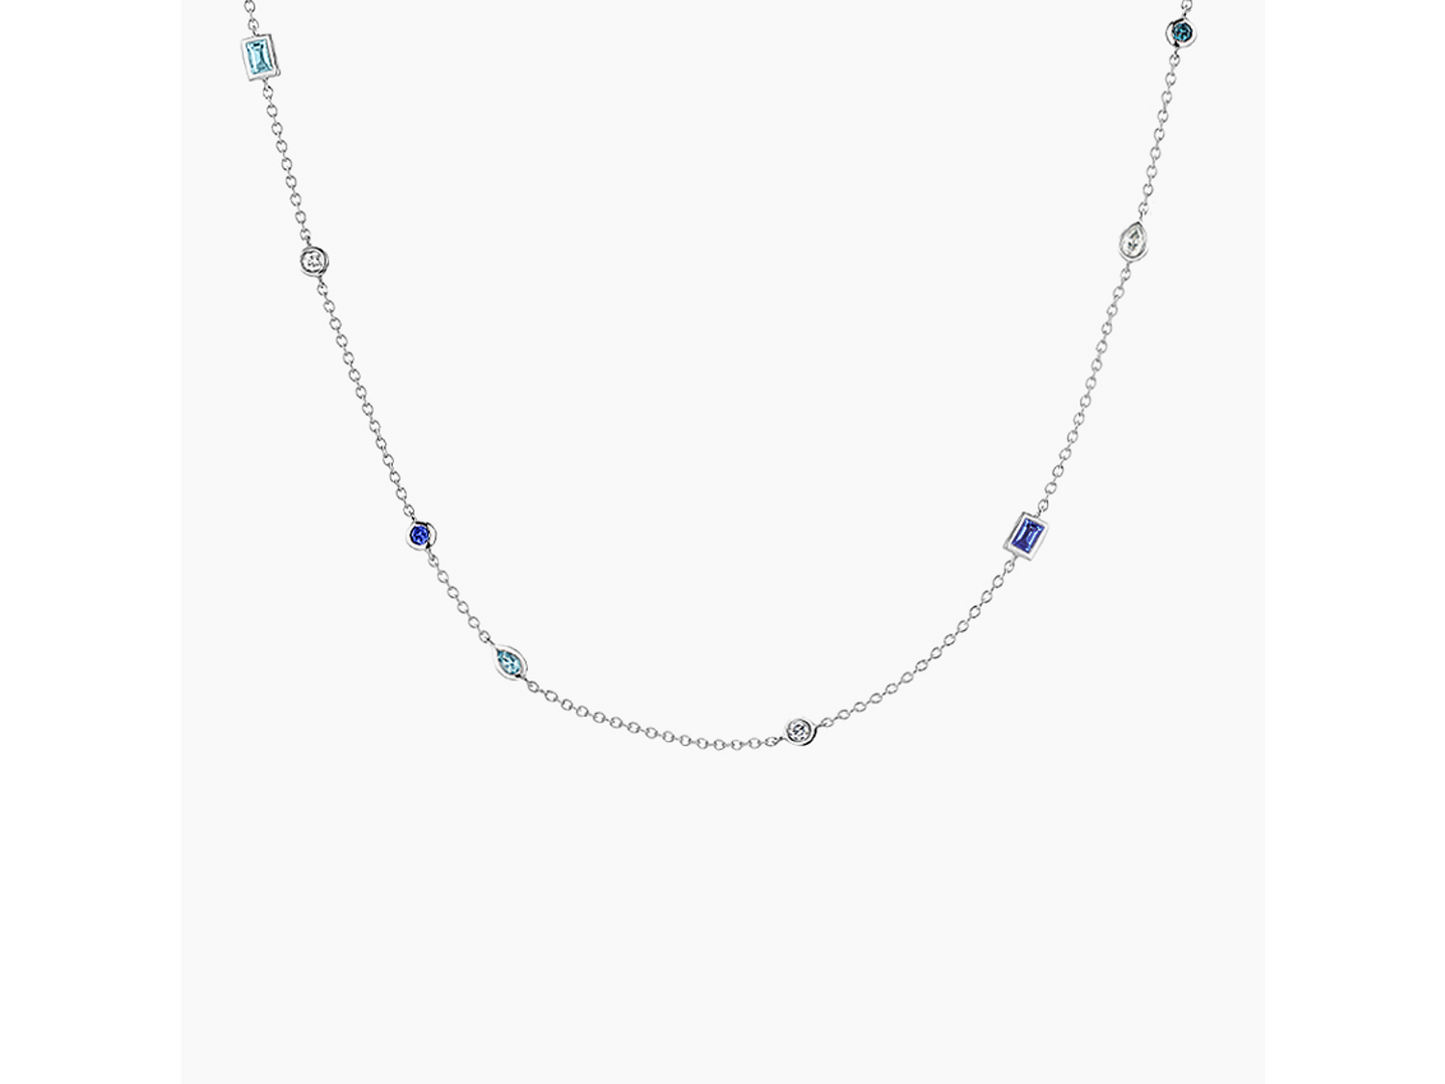 Whimsical Spectrum Multi-Gemstone and Diamond Necklace (1/10 ctw) in 14K White Gold